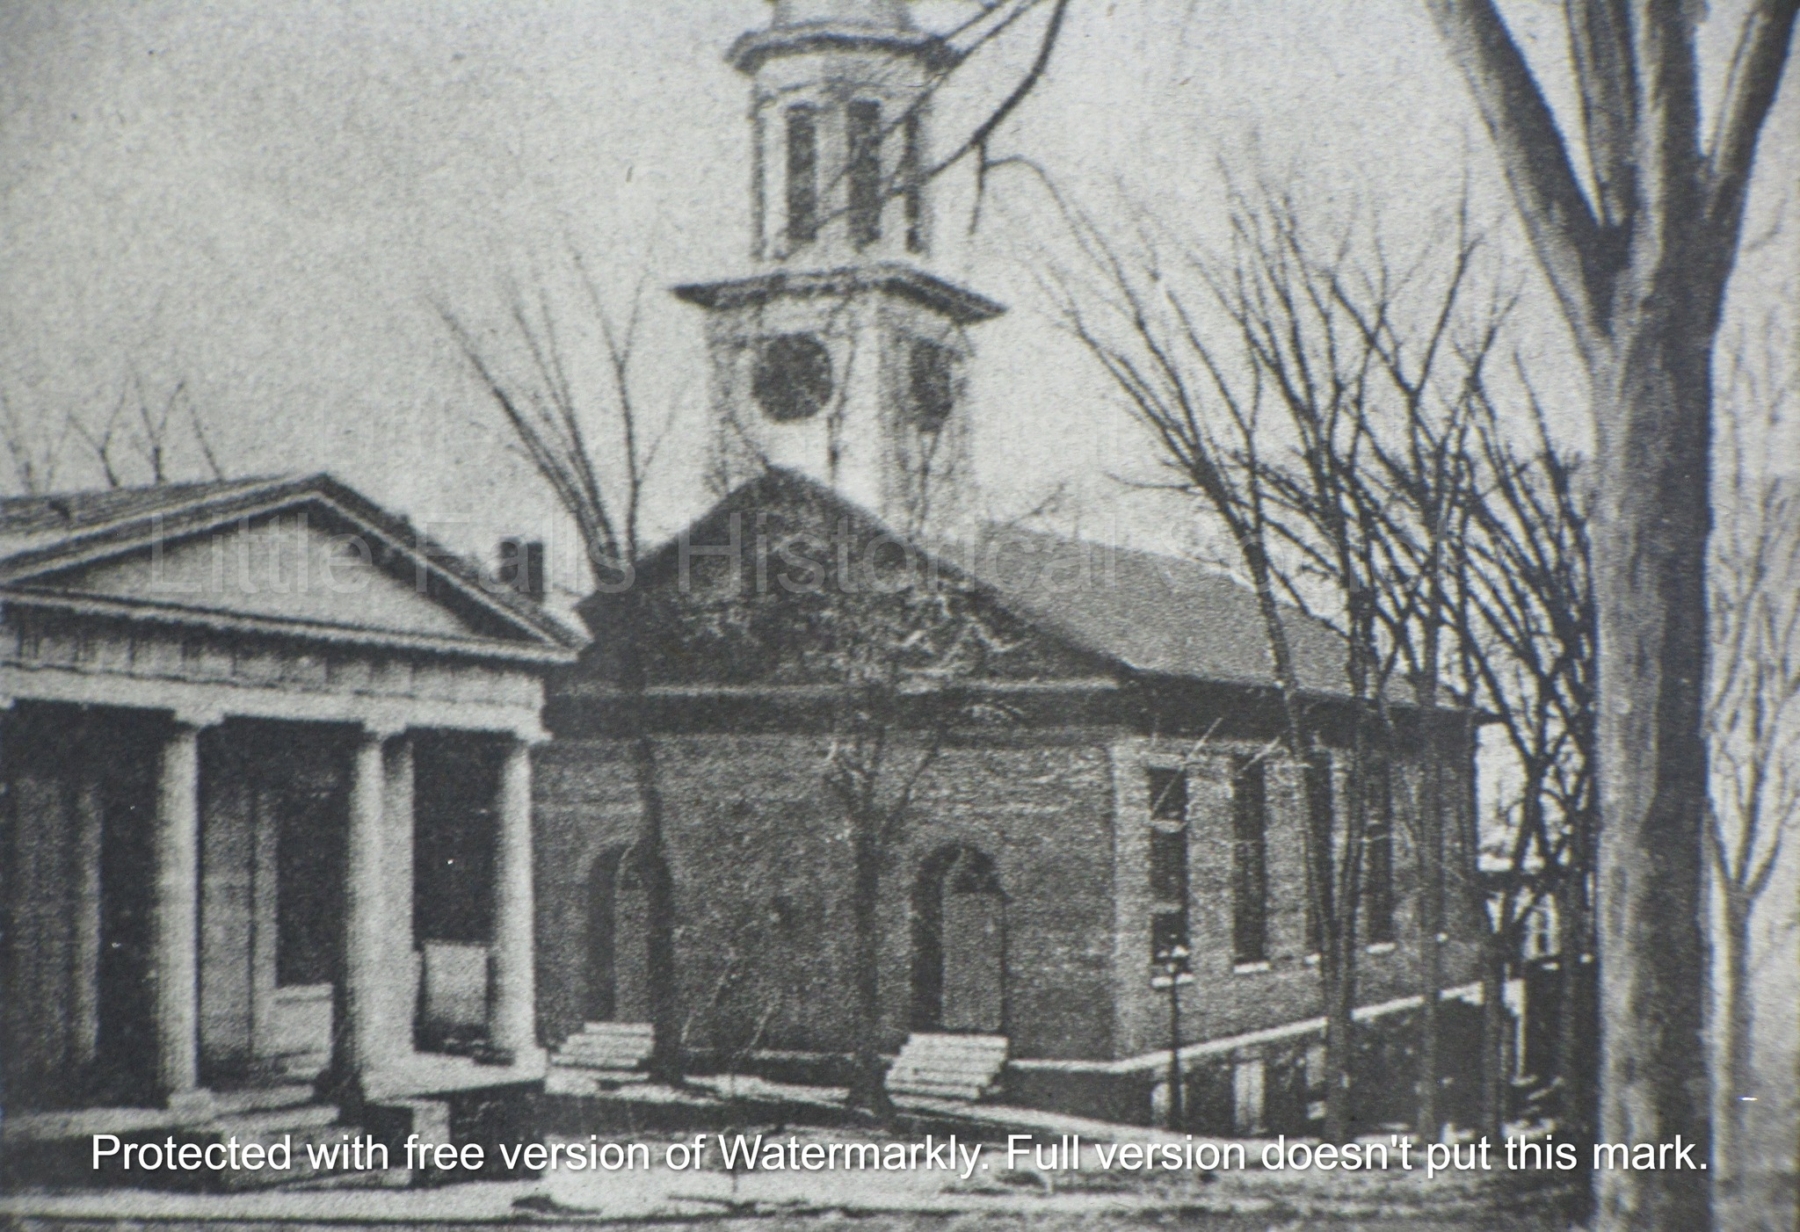 1832 Presbyterian Church | The Whitman and Burrell Co. purchased the old Presbyterian Church lot on the corner of Ann and Albany Street, to expand their business on March 1, 1880, for $4,000., transforming the property into offices and factory space for the manufacturing of dairy equipment.